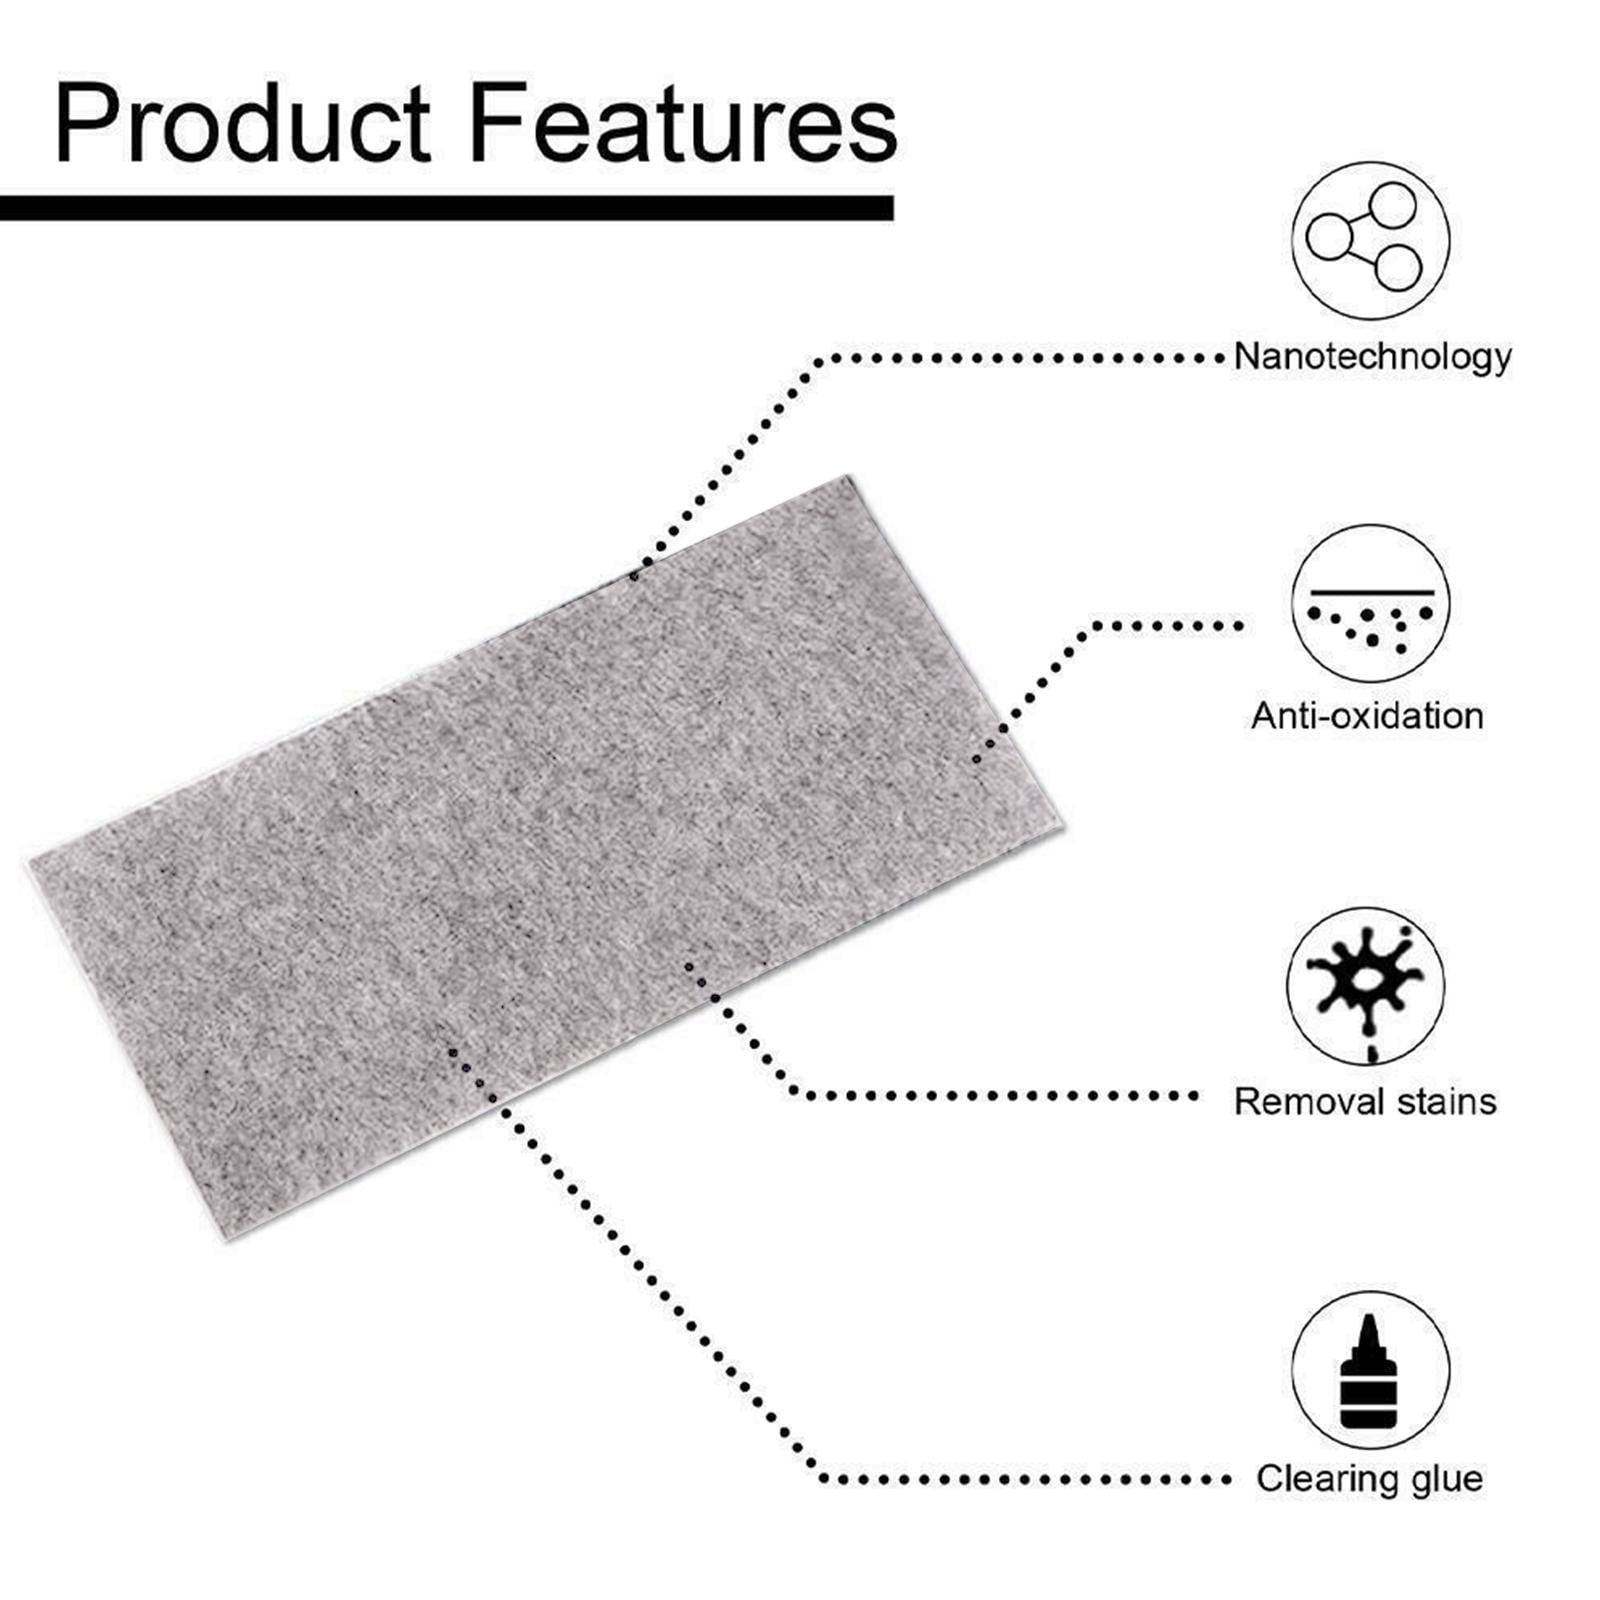  EyeCatcher 3PCS Nano Sparkle Cloth for Car Scratches, Advanced  Nano Car Scratch Remover Easily Repair Scratches, Swirls, Paint Residues,  Water Spots and Restore The Original Color of The Car Paint. 